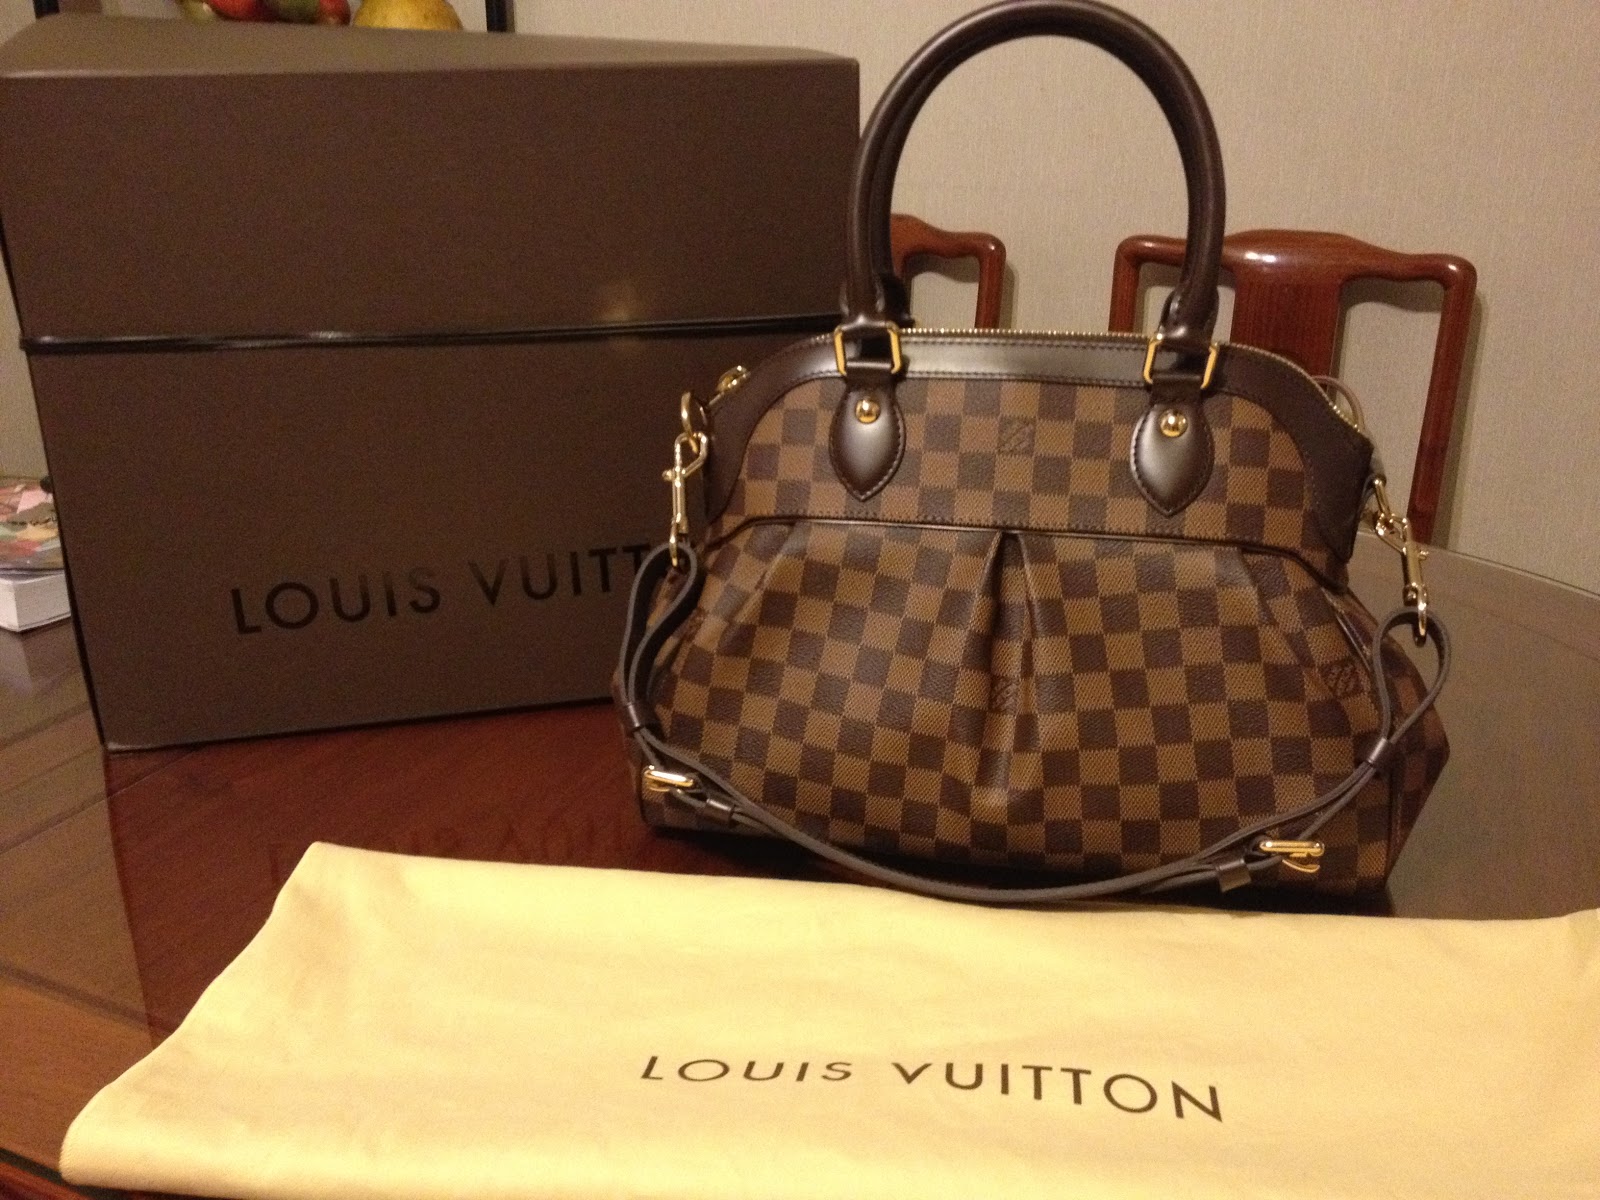 all things fashion, handbags, www.waldenwongart.com me : Louis Vuitton Trevi PM; my review on this ...